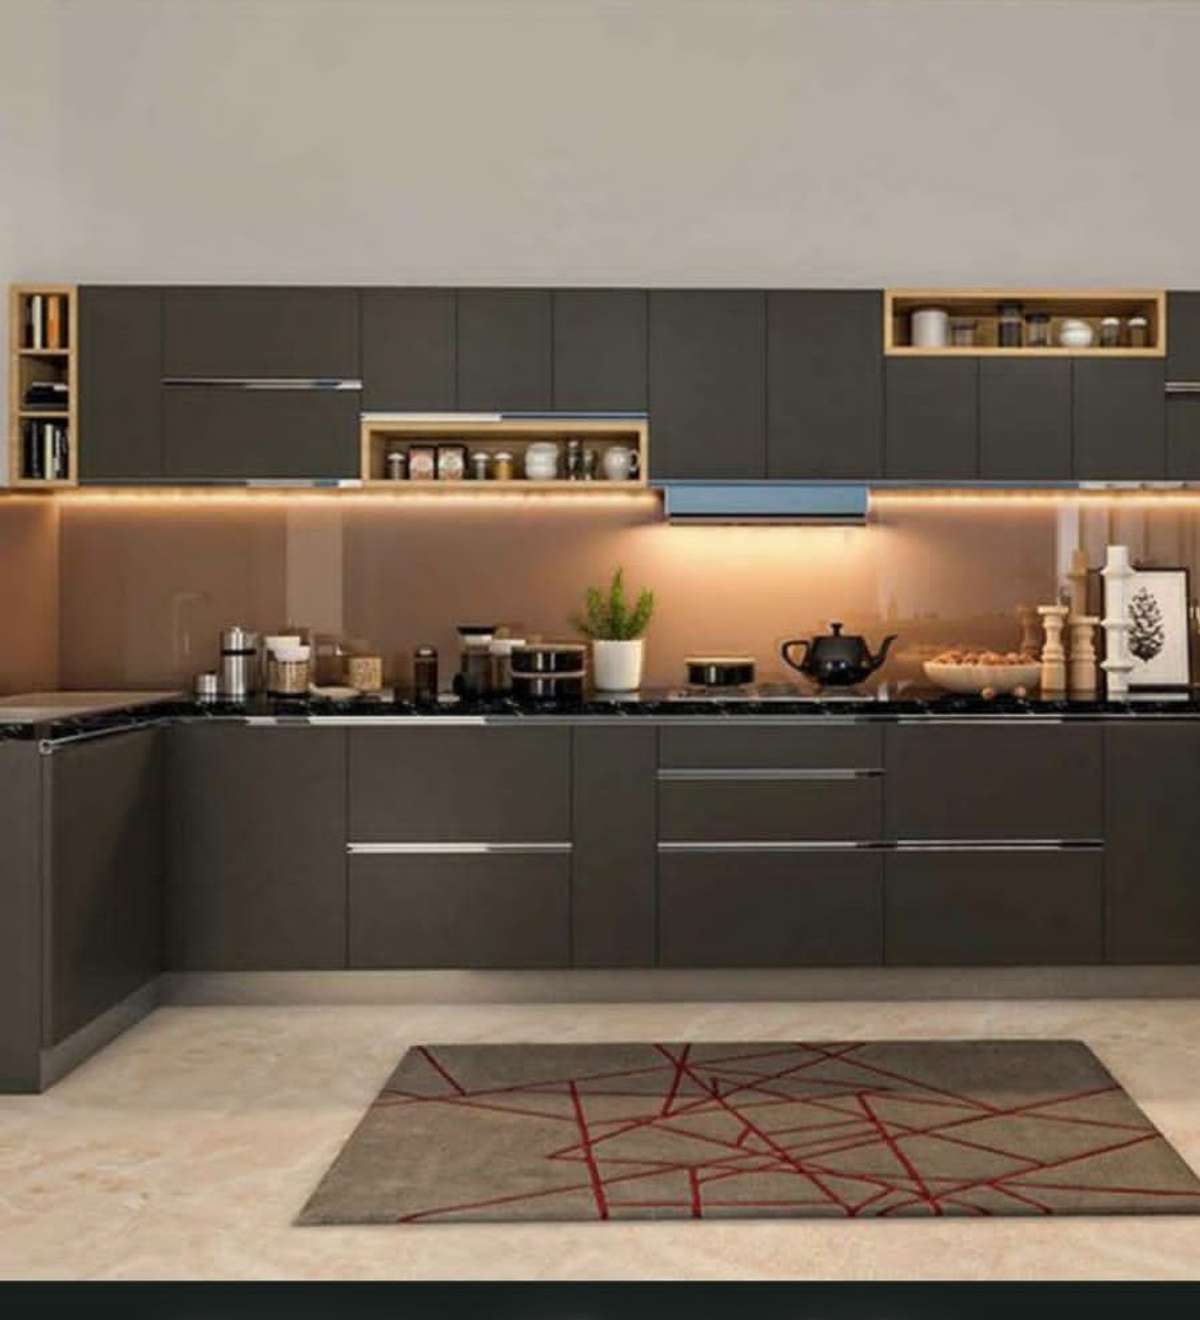 Kitchen, Lighting, Storage Designs by Building Supplies Lalit Mohan Sharma, Ghaziabad | Kolo